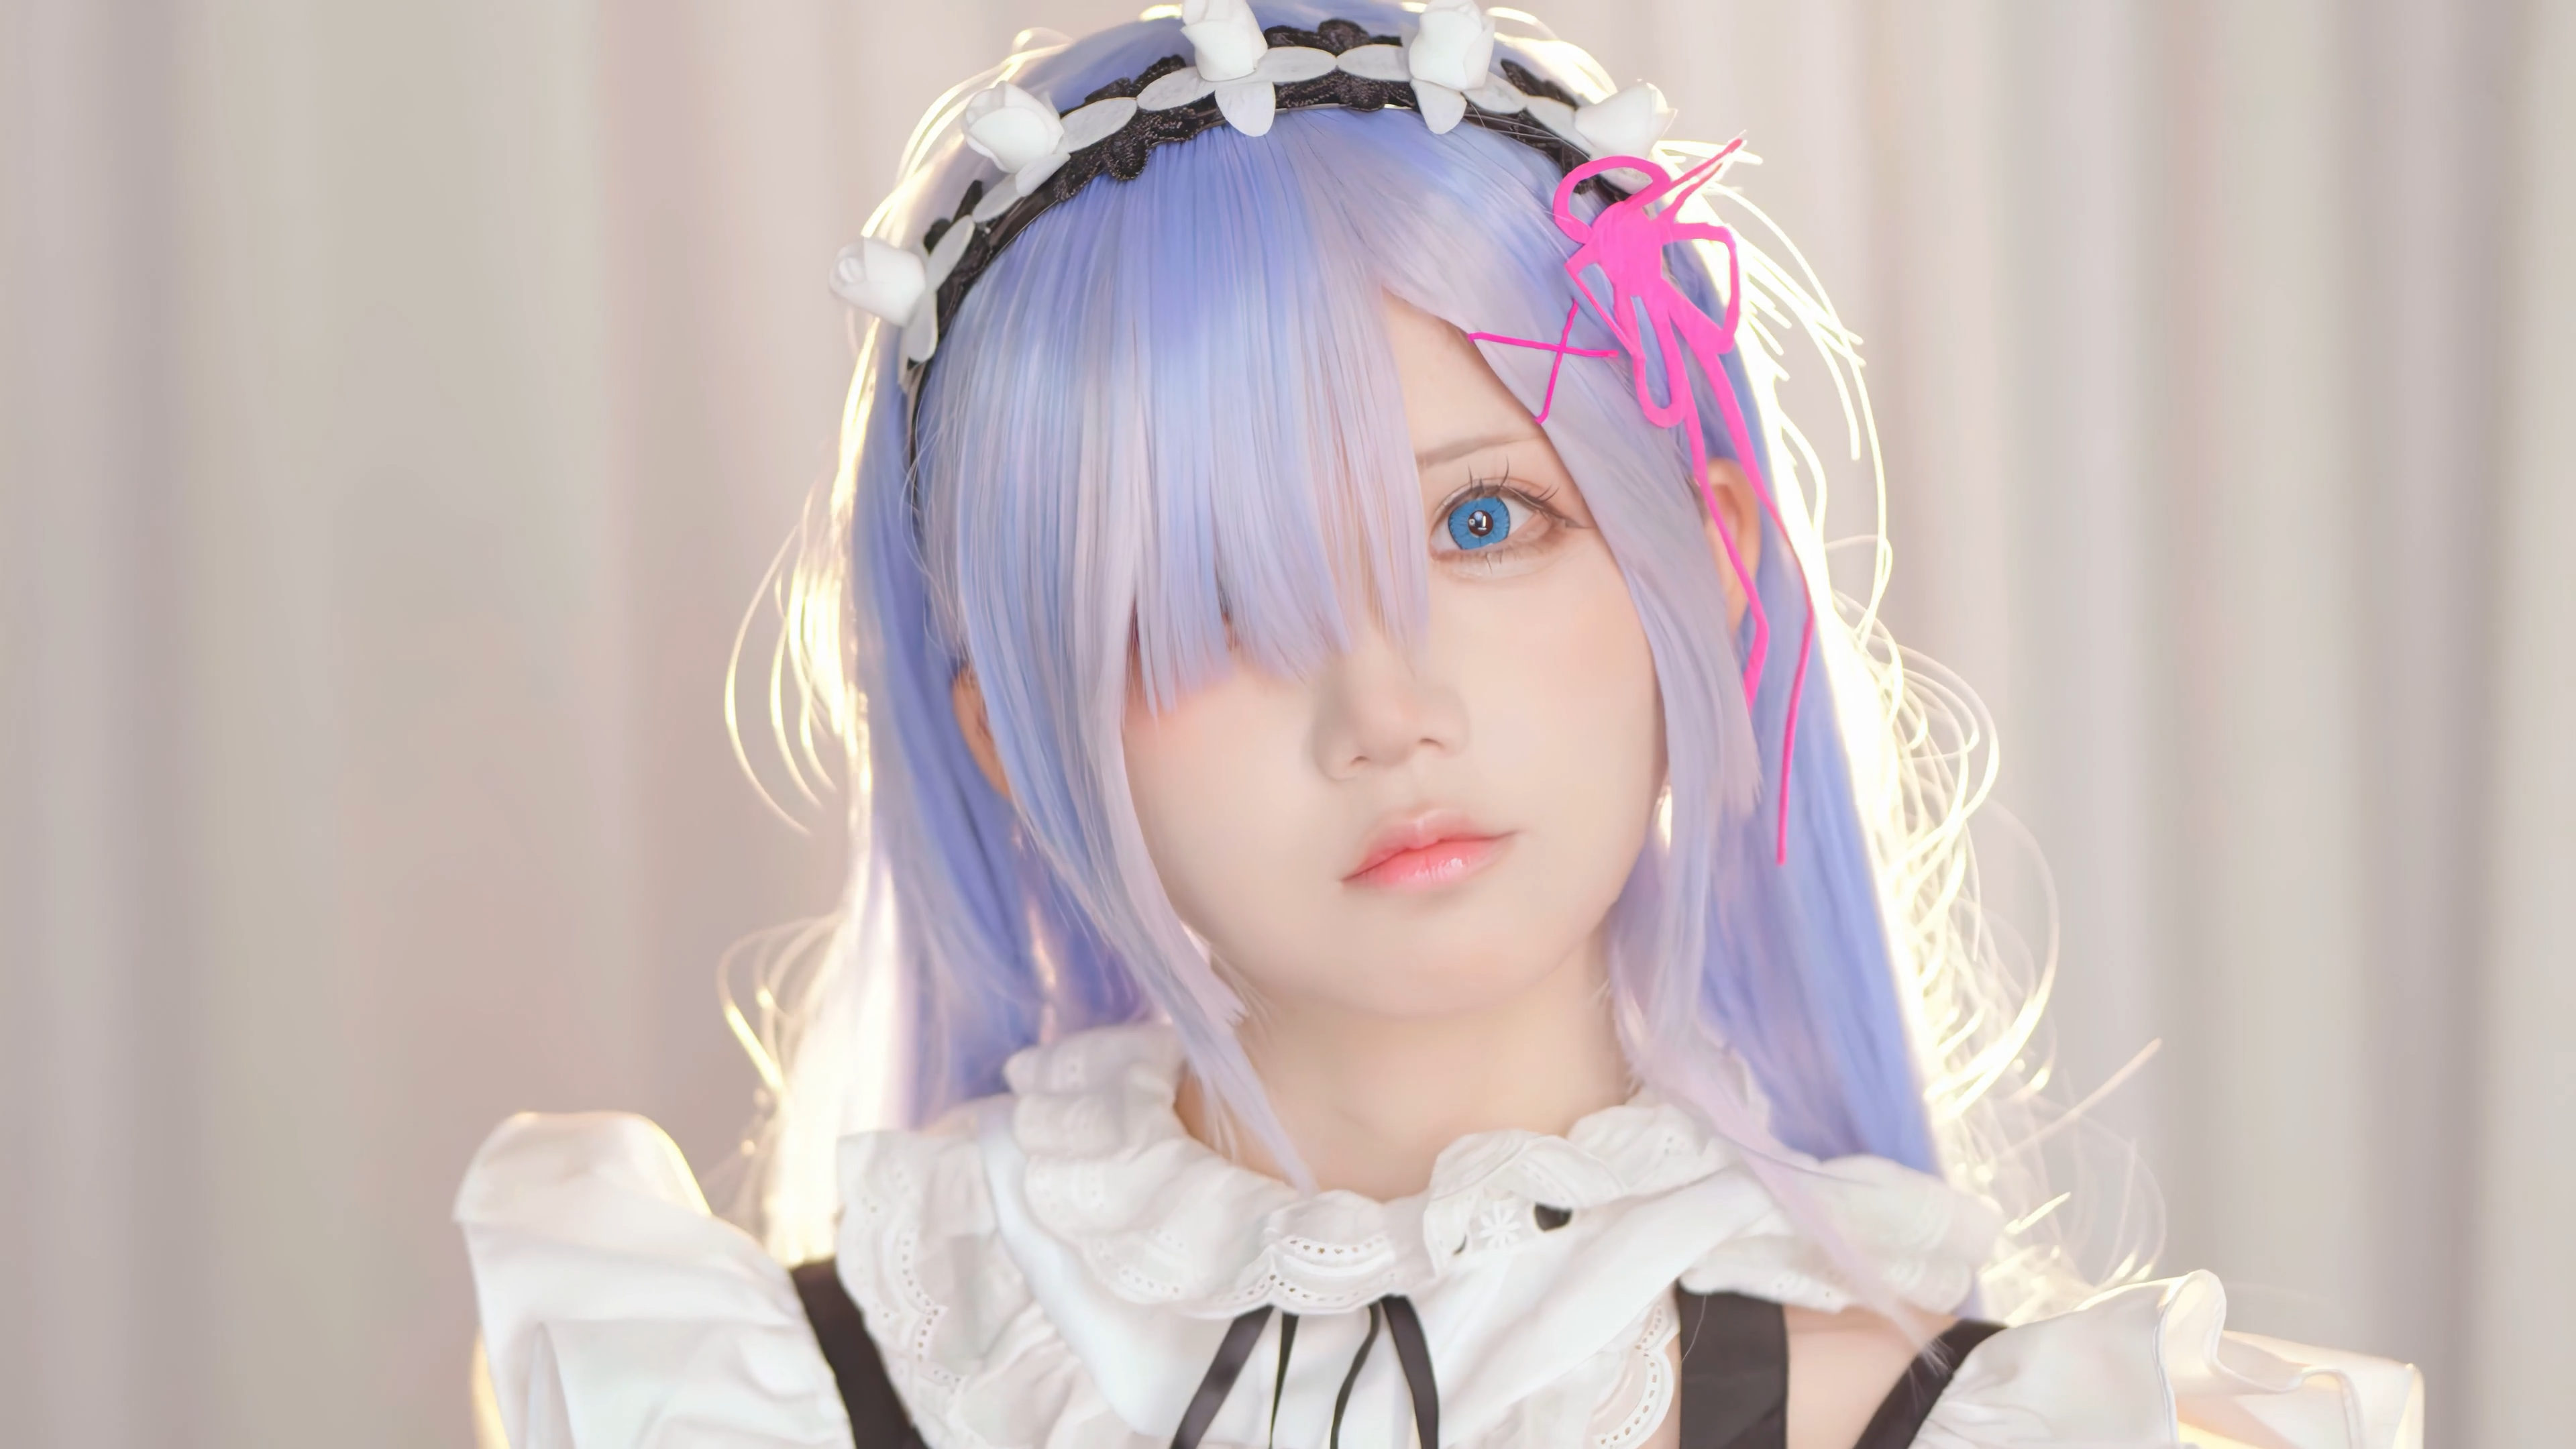 People 3840x2160 haixiu7 cosplay Rem (Re:Zero) Asian maid outfit women